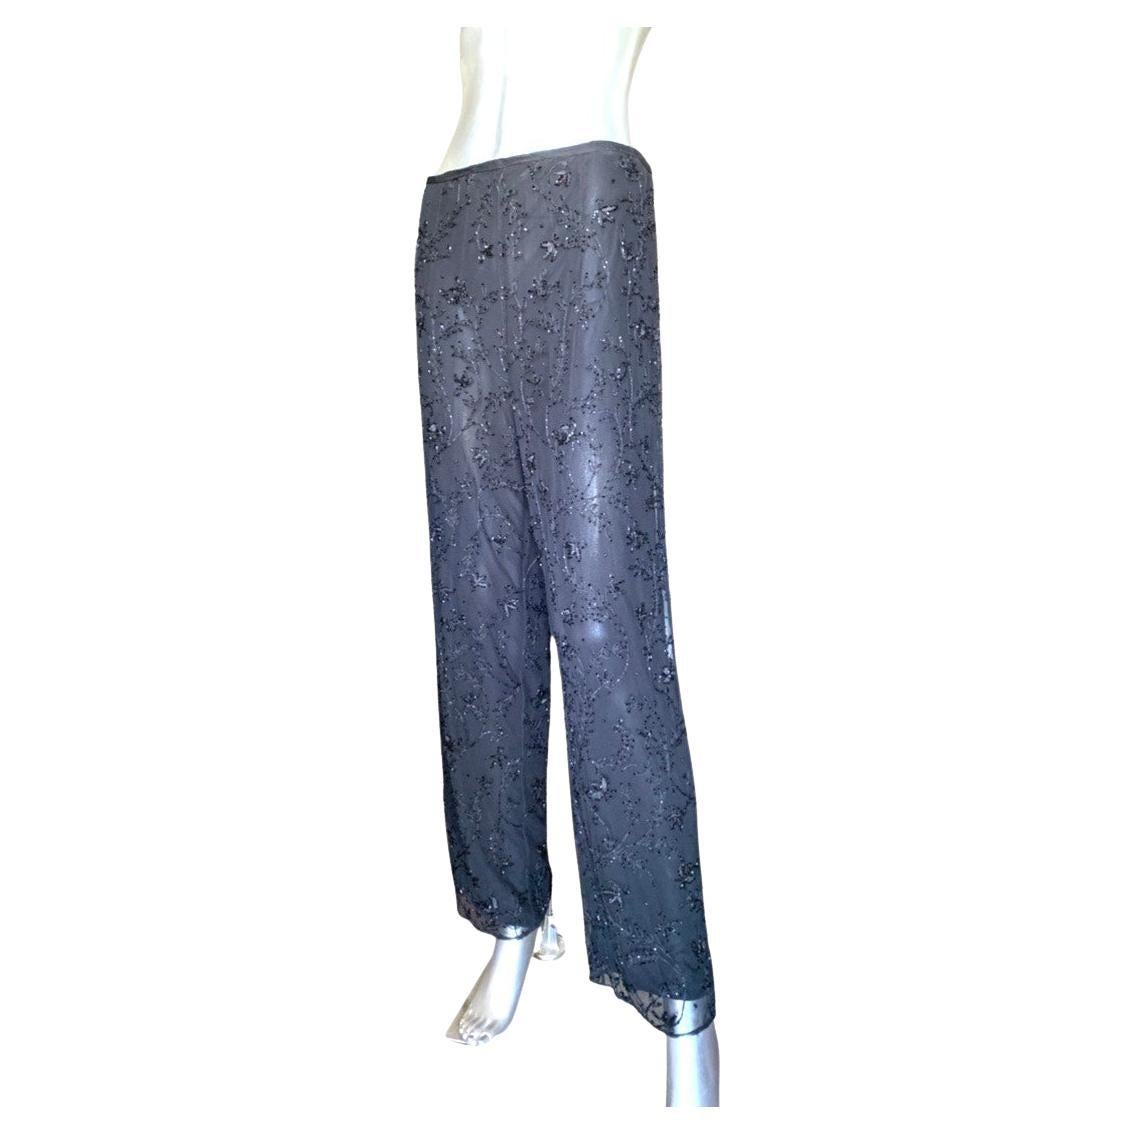 Such a beautiful pair of pants designed in limited edition by Worth New York. So happy to list these in size 16 as we find very few chic, high quality evening clothes in sizes 14 and up. These chiffon pants are lined. Intricate and lovely sequins